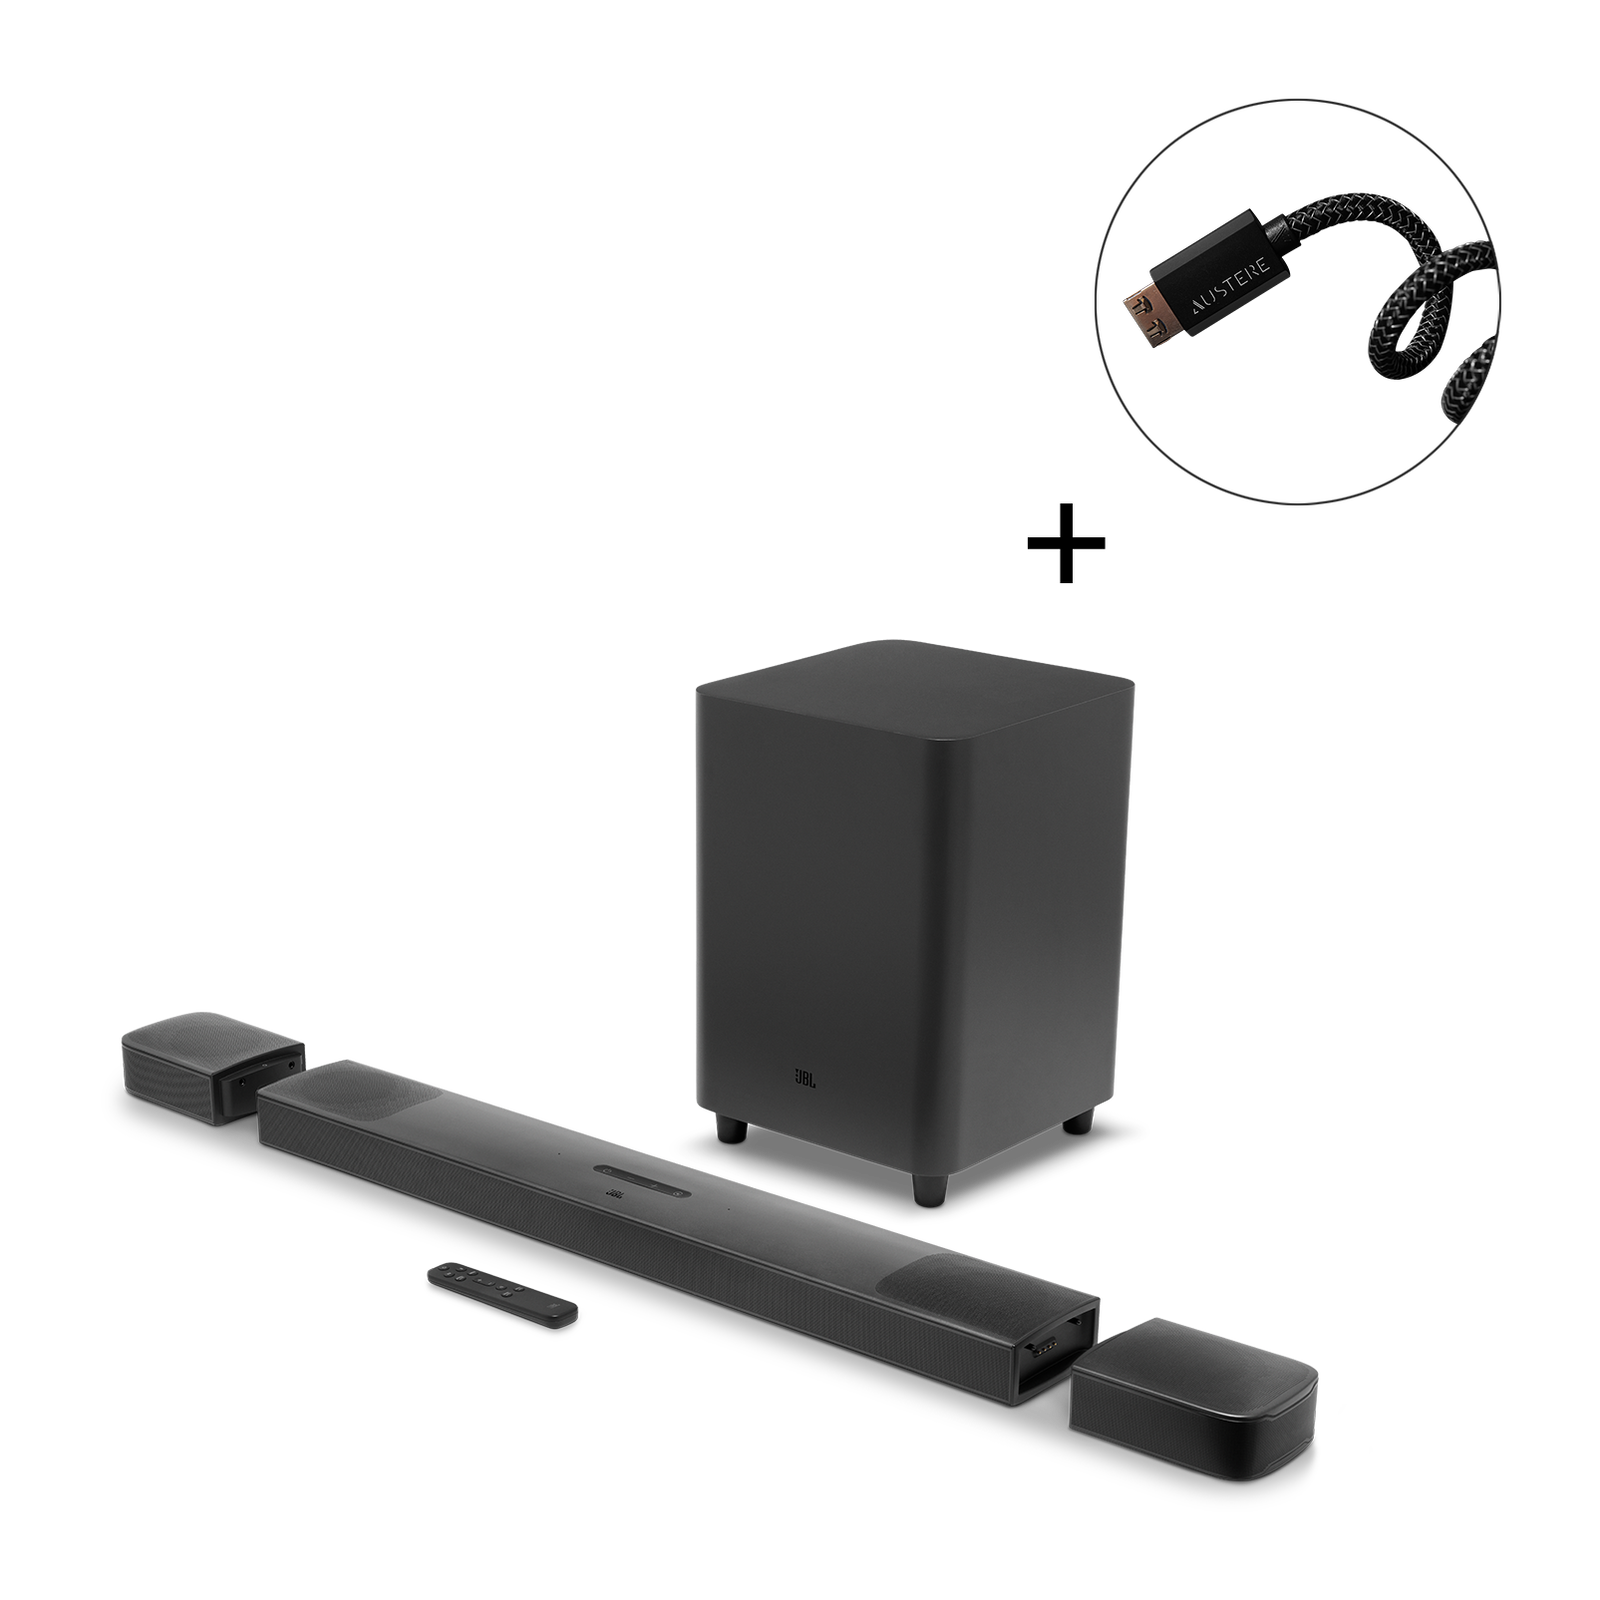 BAR 9.1 True Wireless Surround with Dolby Atmos® + 8K HDMI Cable Bundle